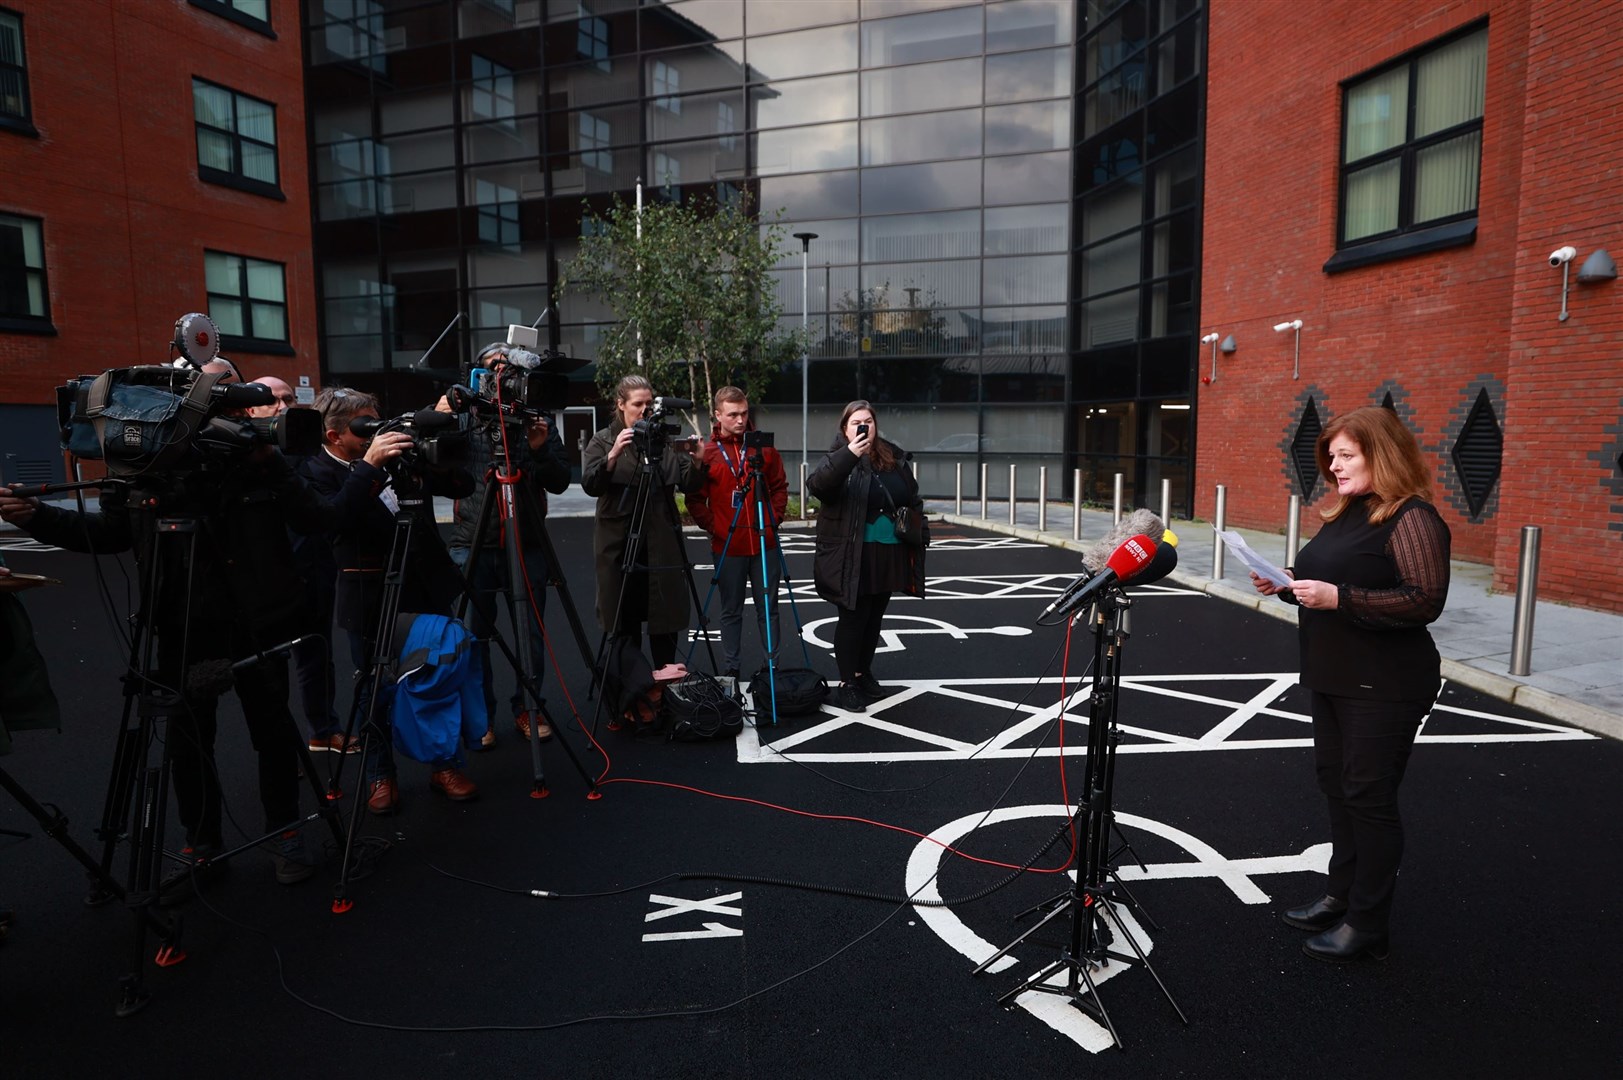 Policing Board chairwoman Deirdre Toner speaks to the media after the meeting (Liam McBurney/PA)